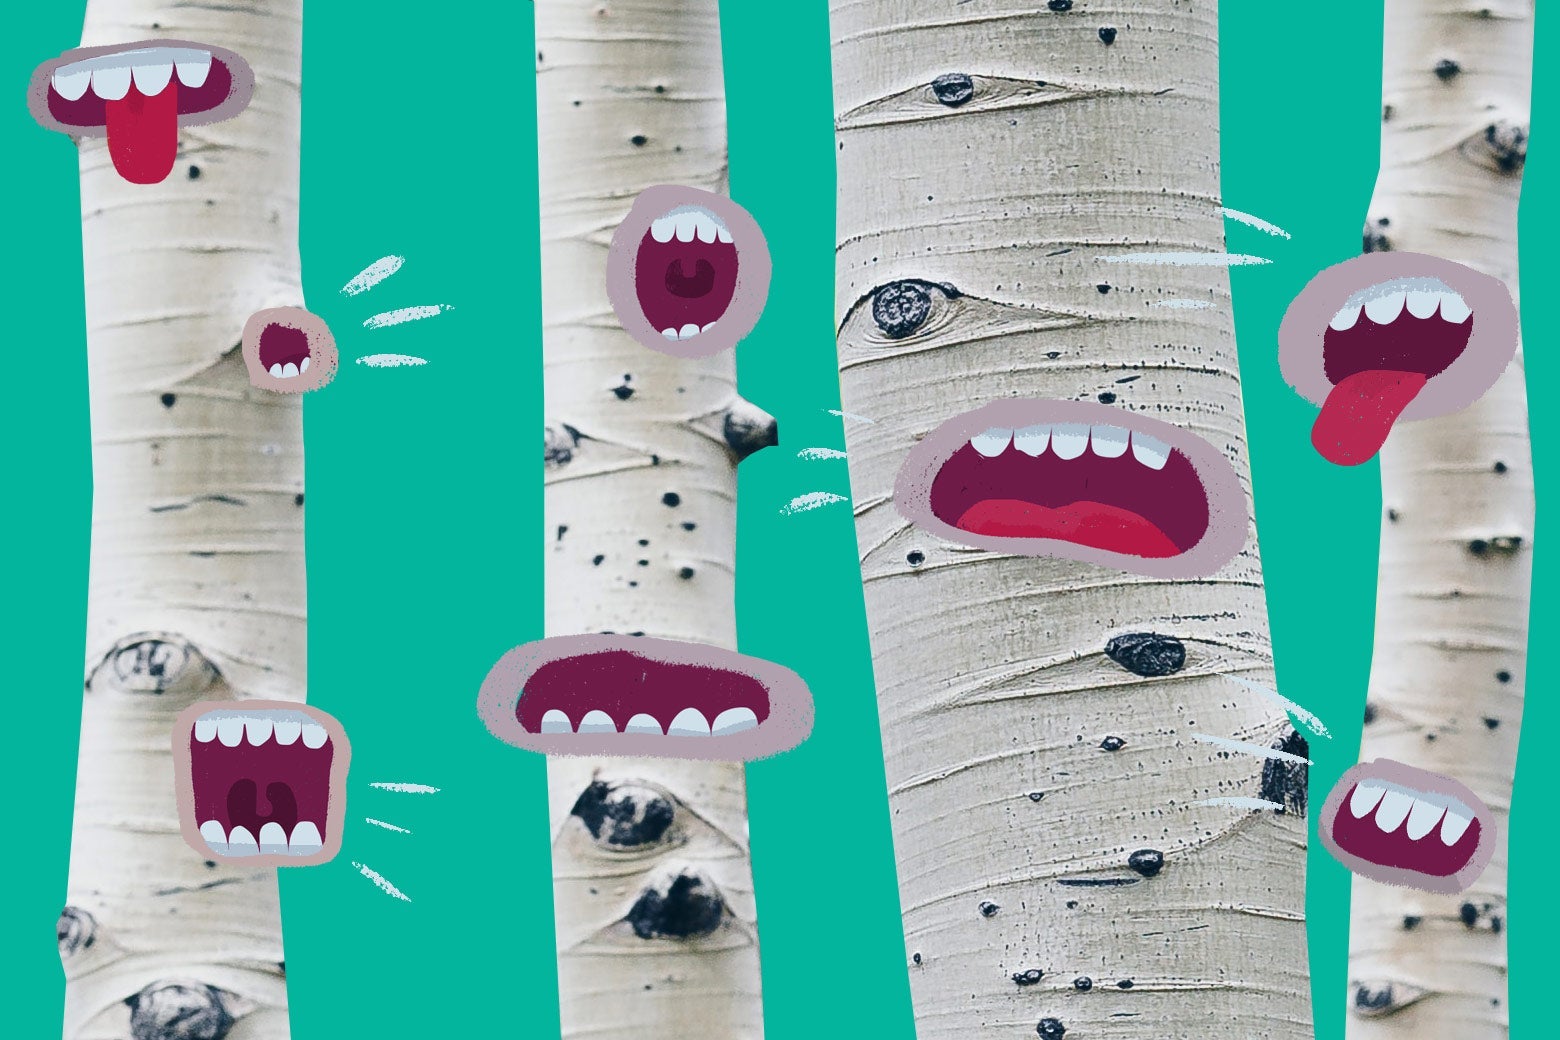 Photo illustration of trees with mouths that are speaking.